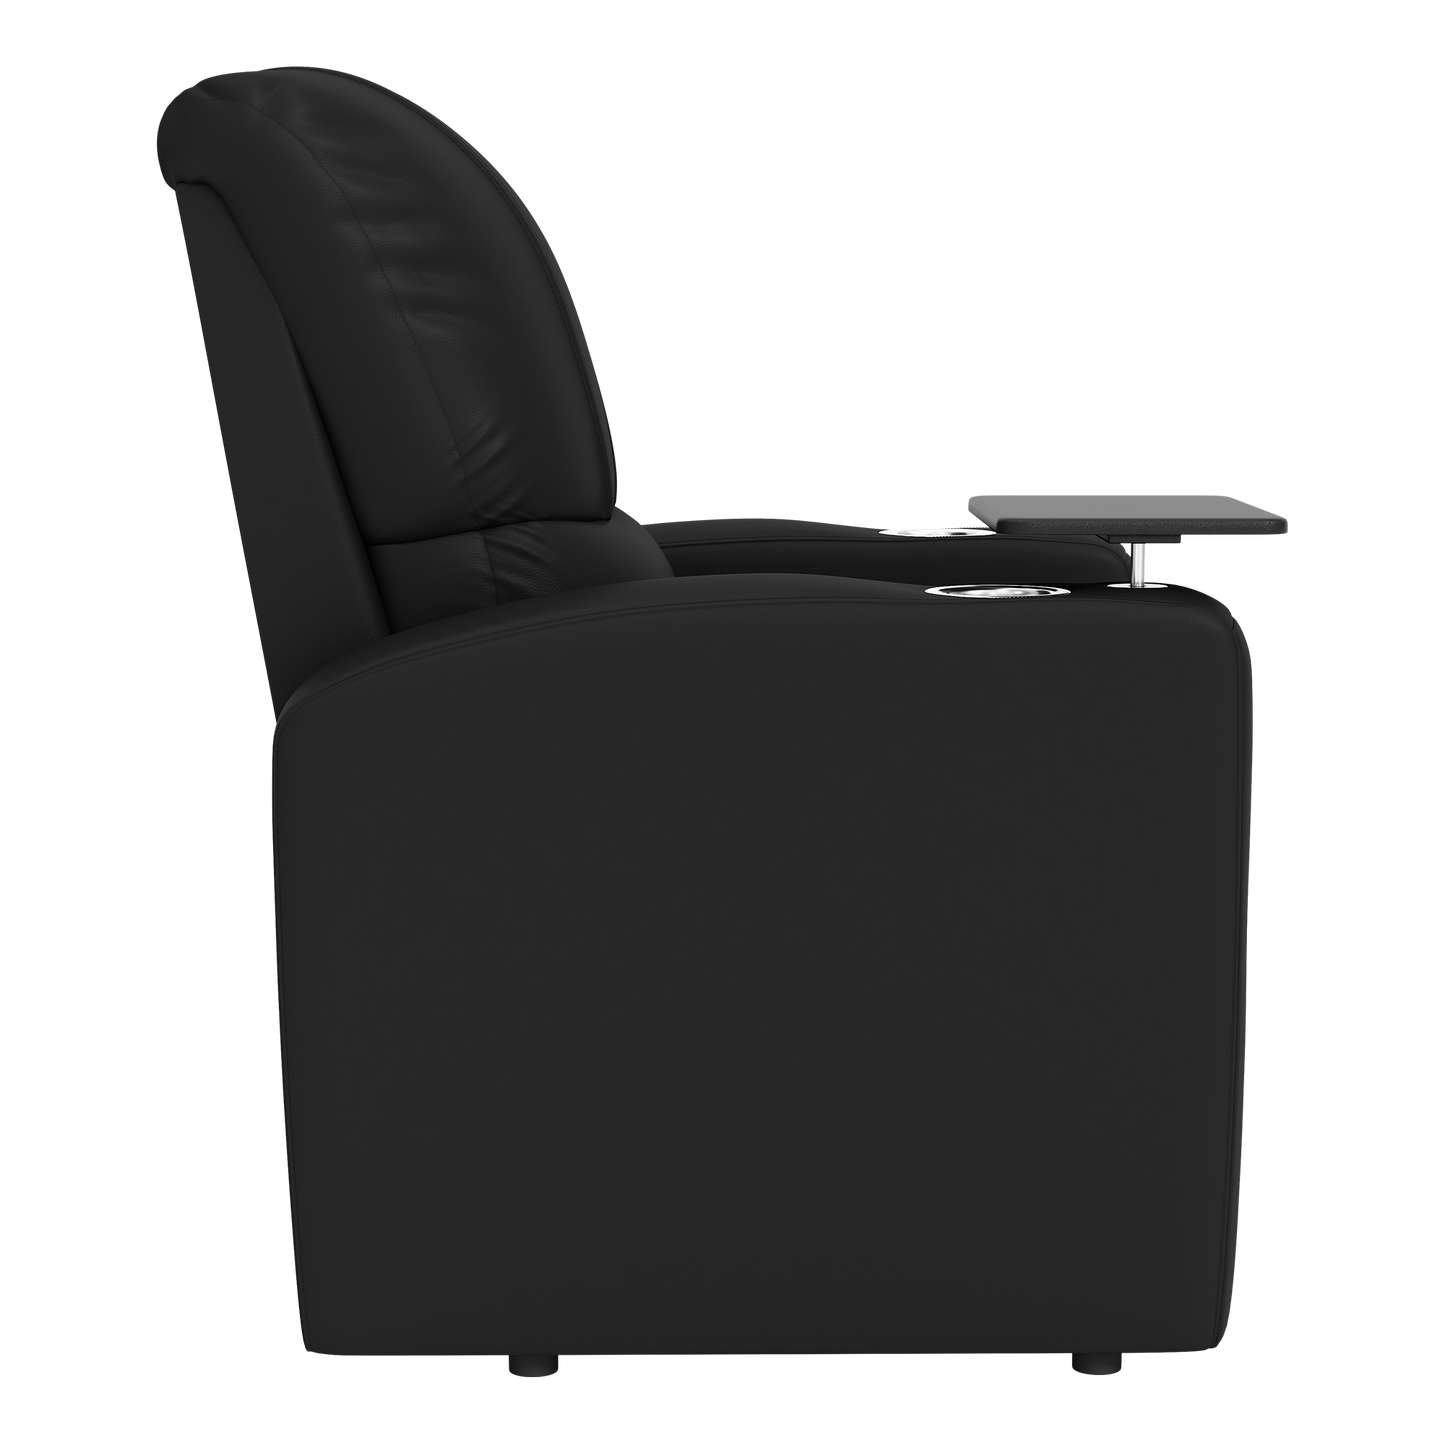 Stealth Power Plus Recliner with Southern Illinois University Logo